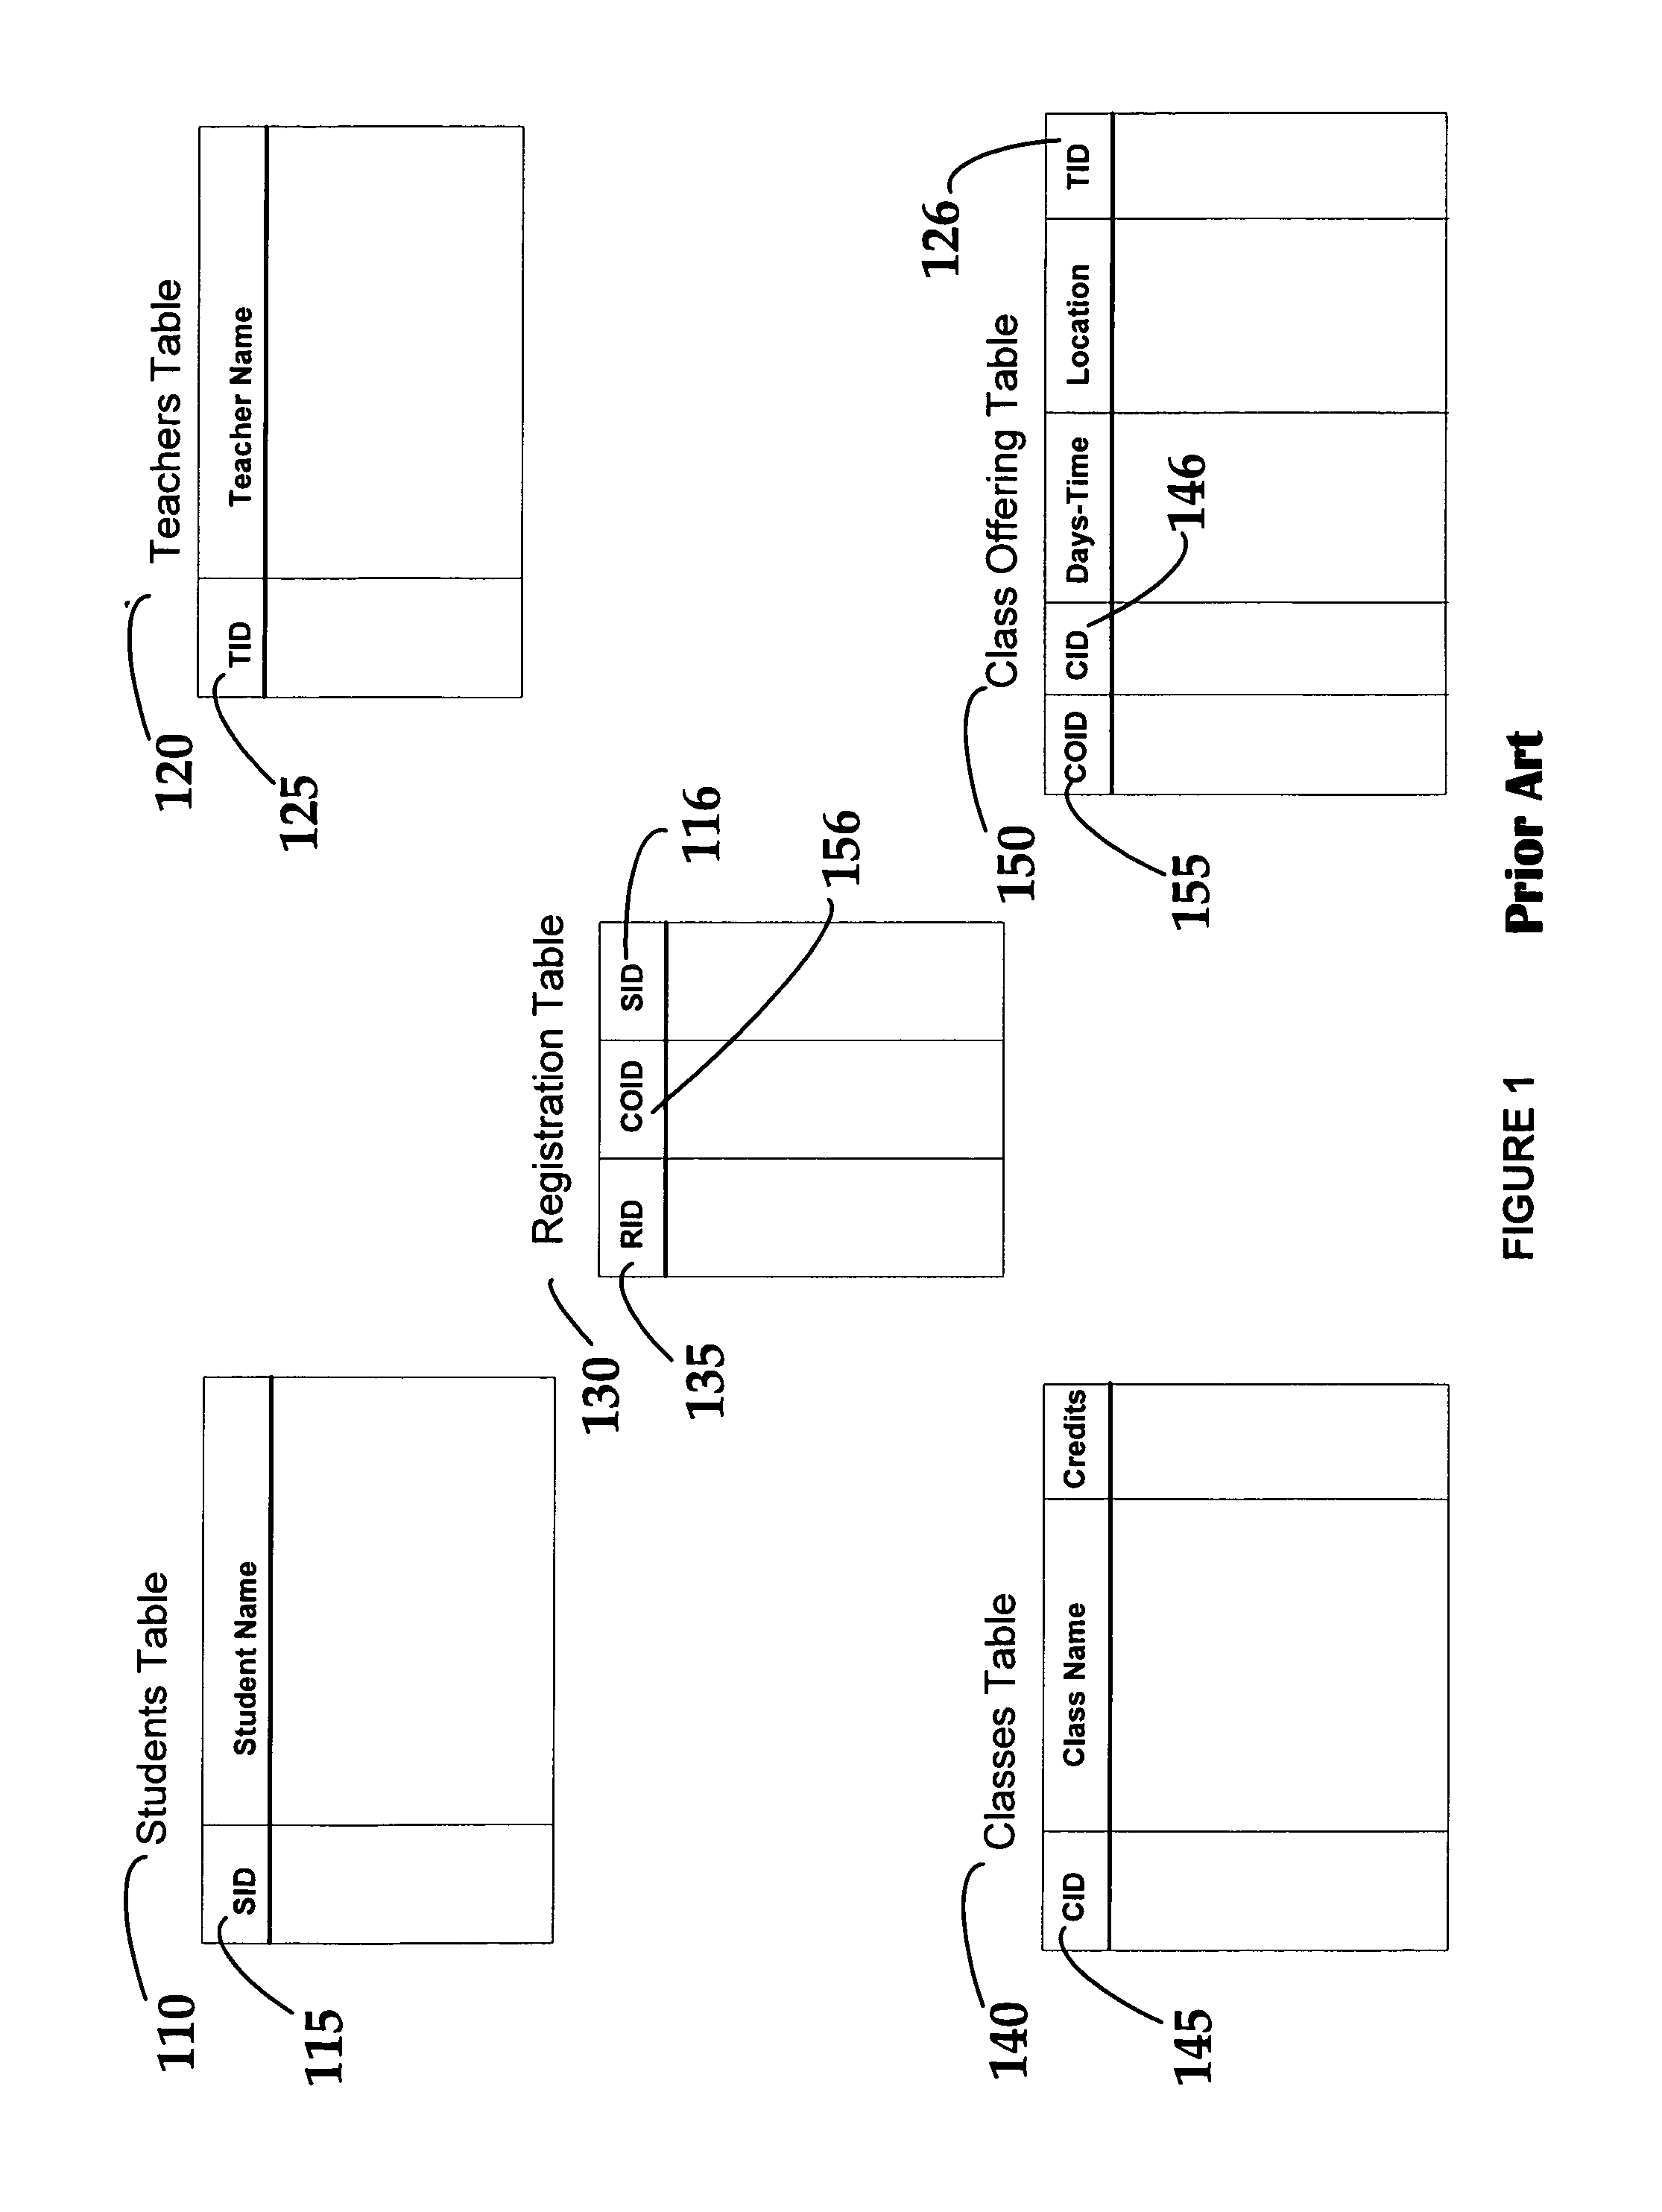 Method of representing an XML schema definition and data within a relational database management system using a reusable custom-defined nestable compound data type